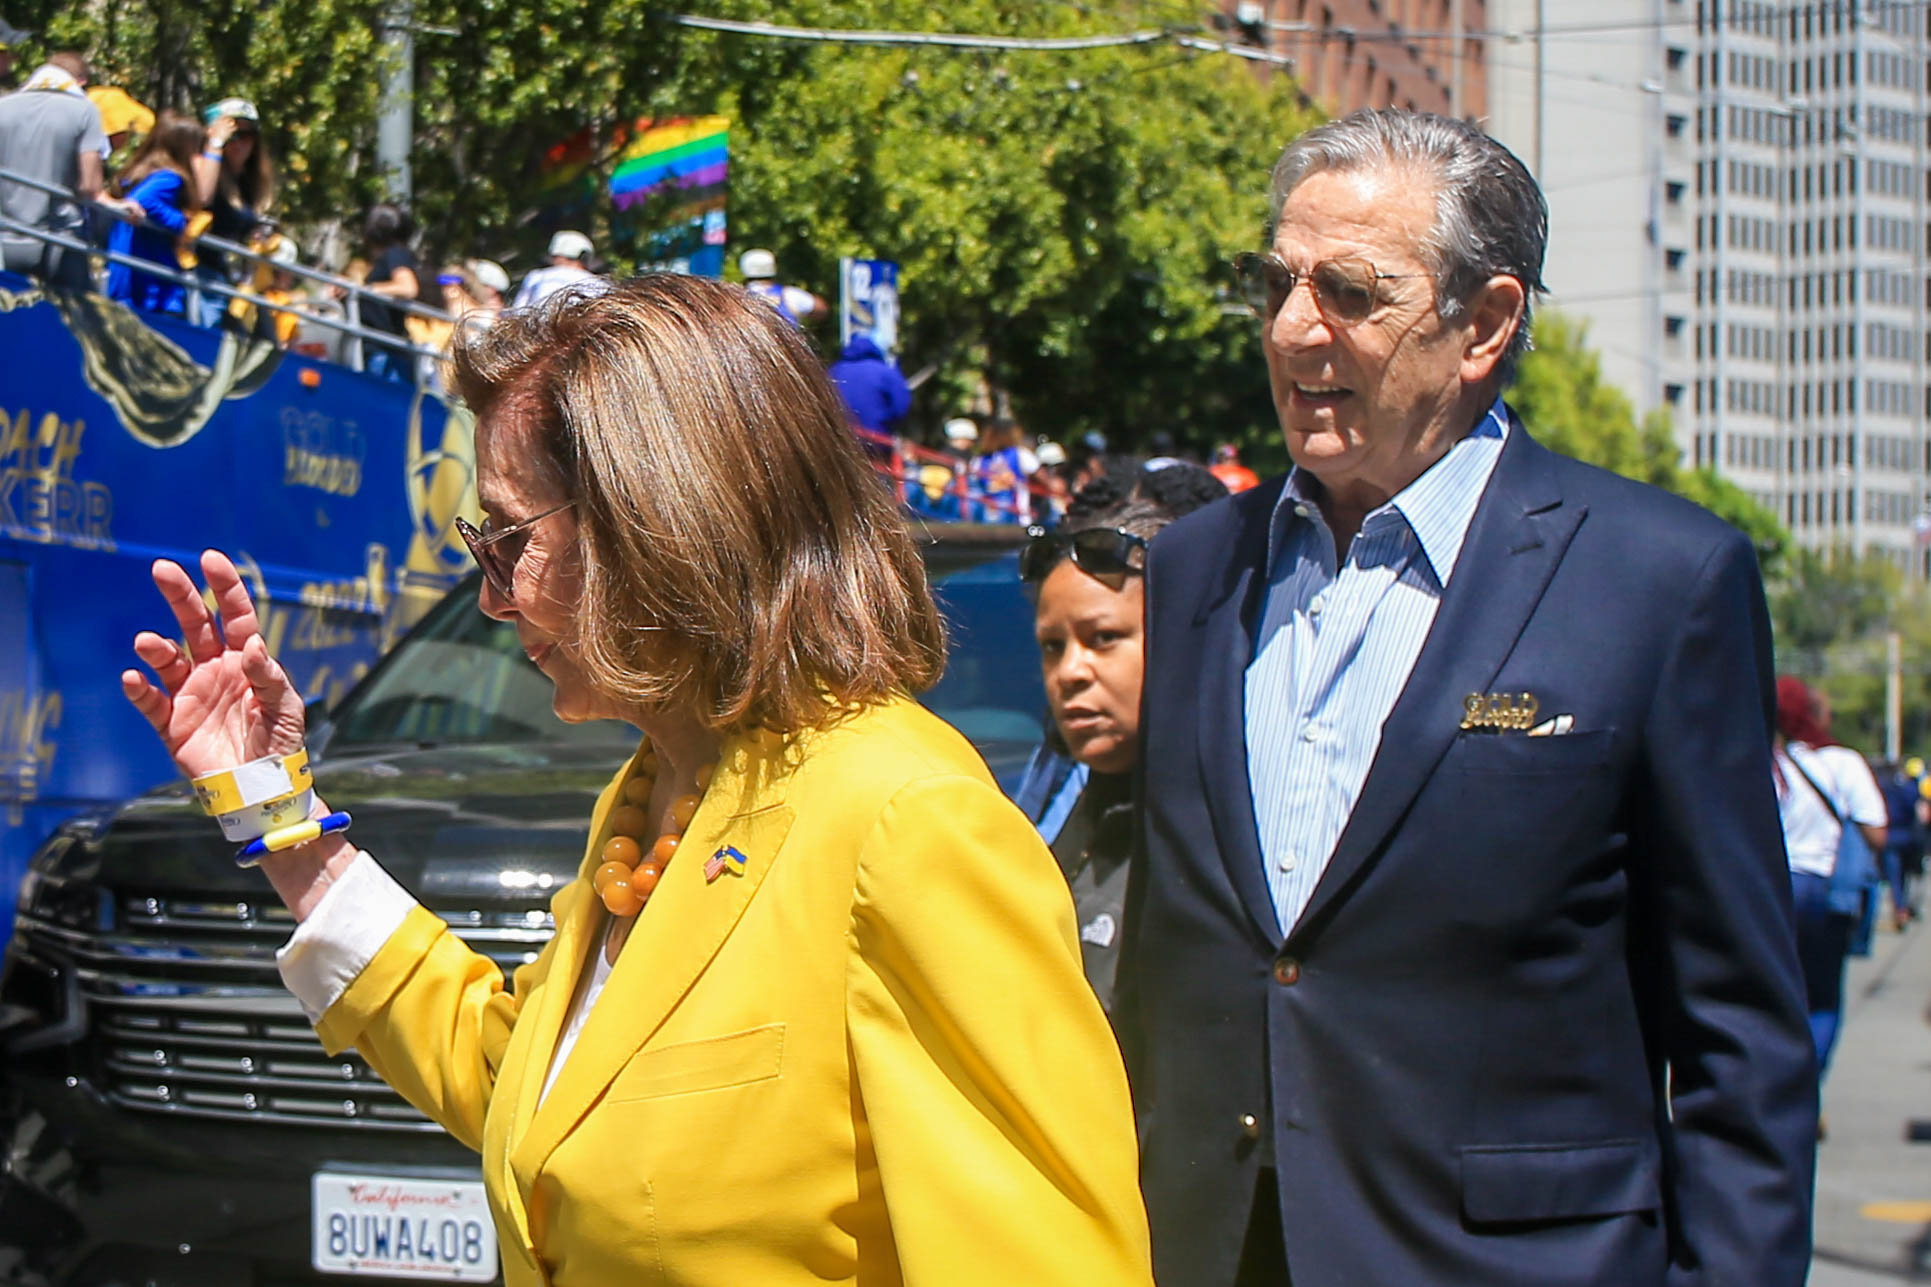 Misinformation fuels false narratives about attack on Paul Pelosi